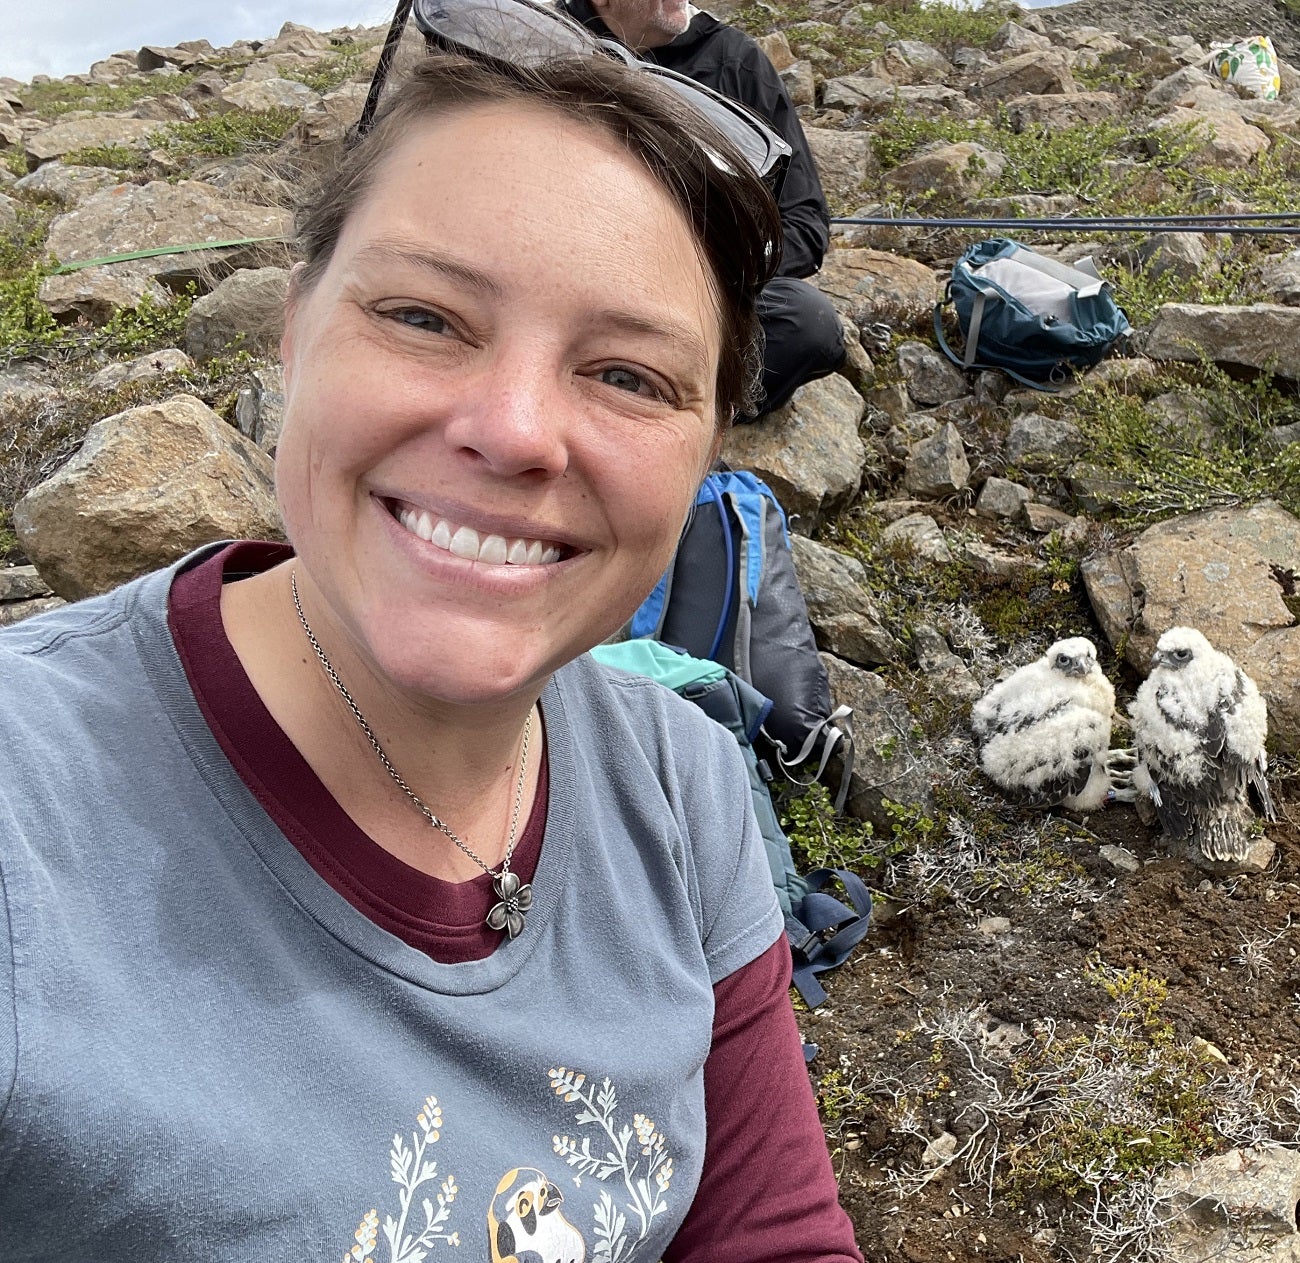 Stephanie Galla with Gyrfalcon nestlings on a rocky slope